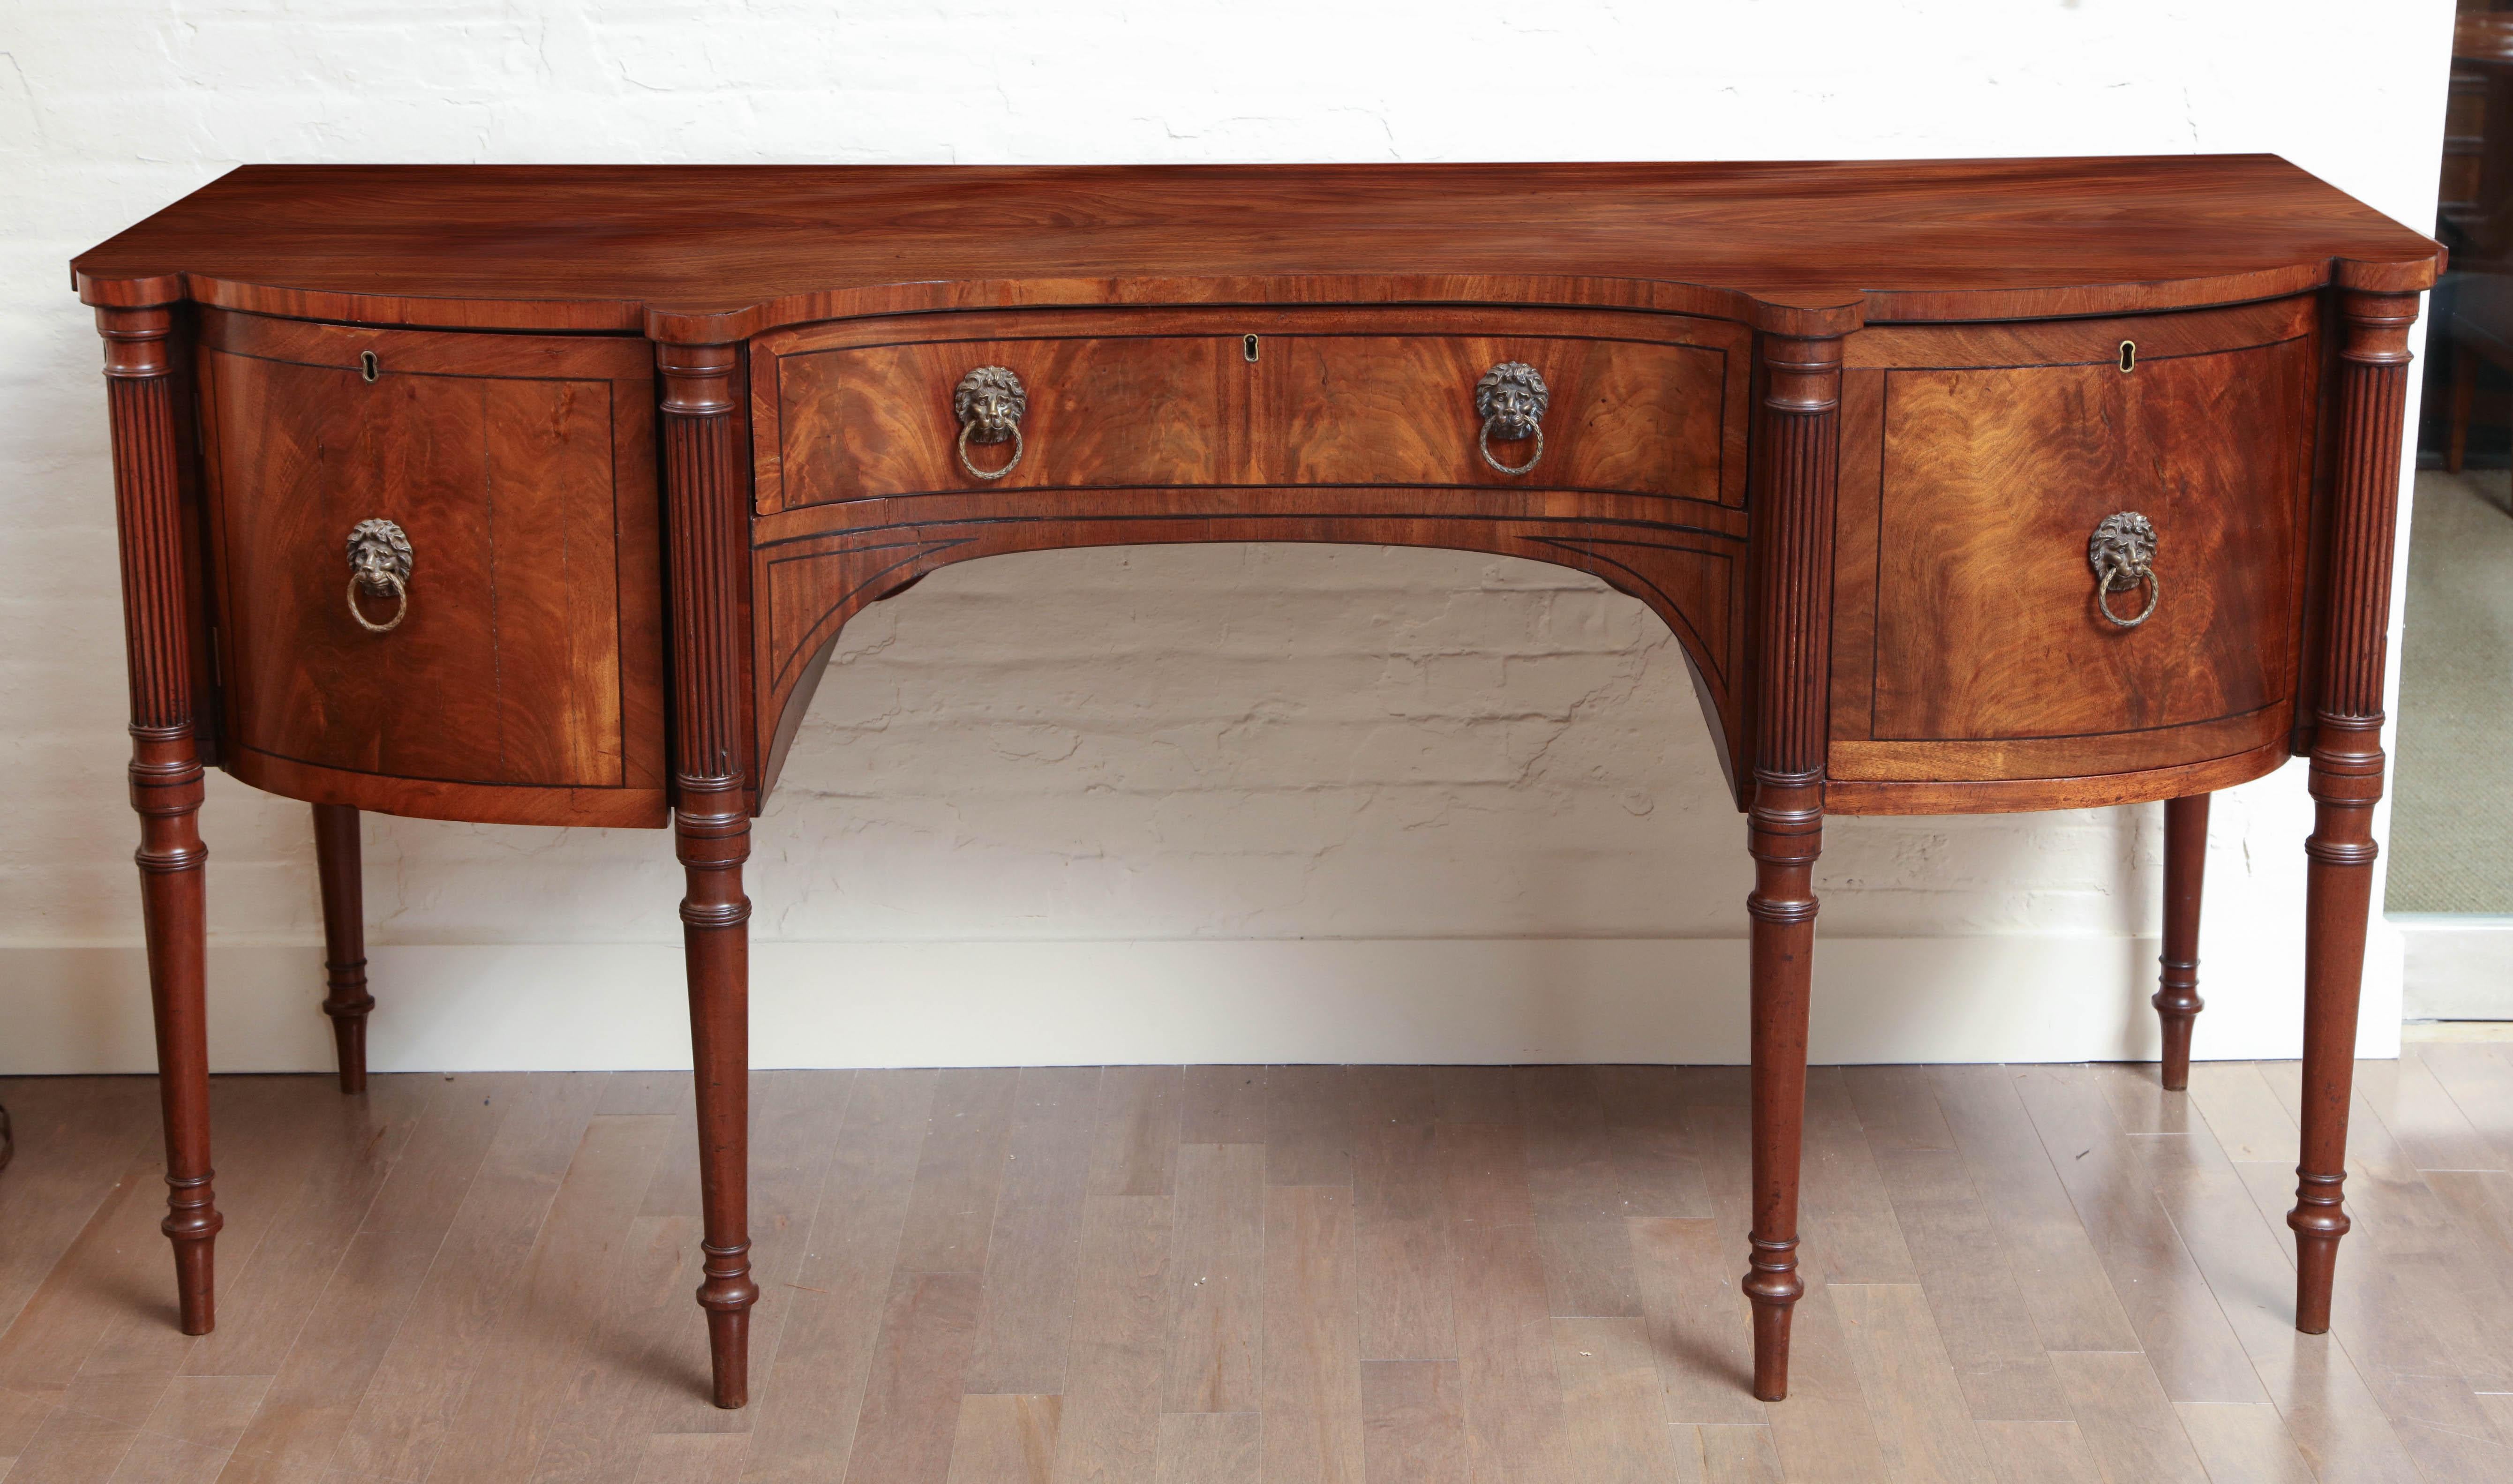 Early 19th century English Regency sideboard with center drawer, drawer on right that is fitted for bottle storage, and door on left opening to storage space.